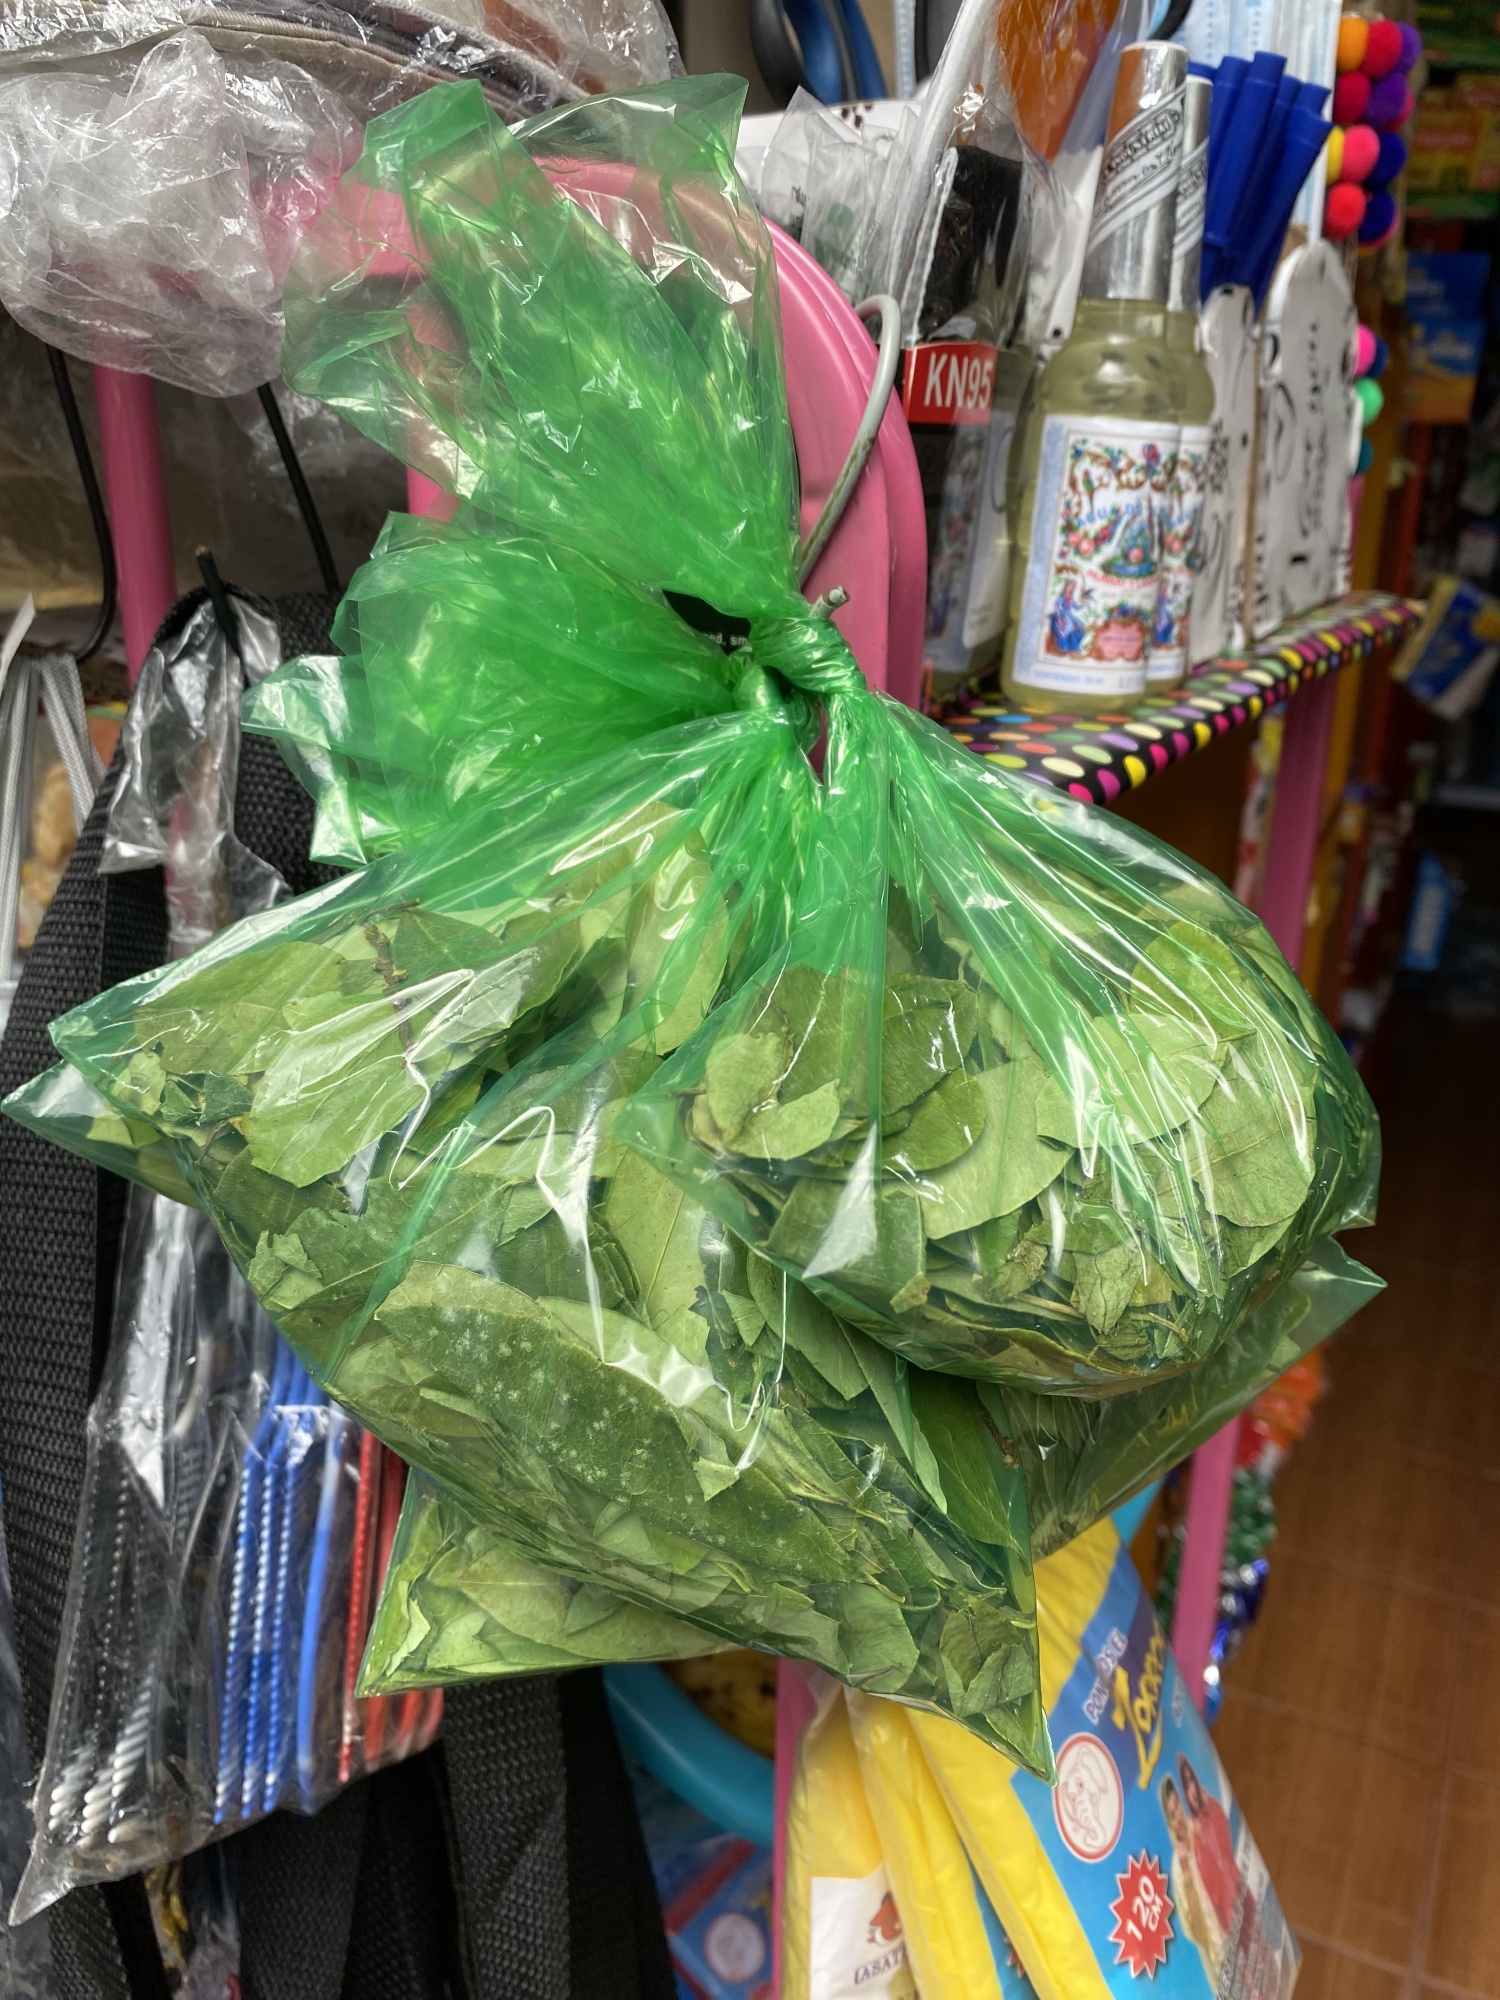 They were selling bags of coca leaves... It helps with your breathing... Important story later...